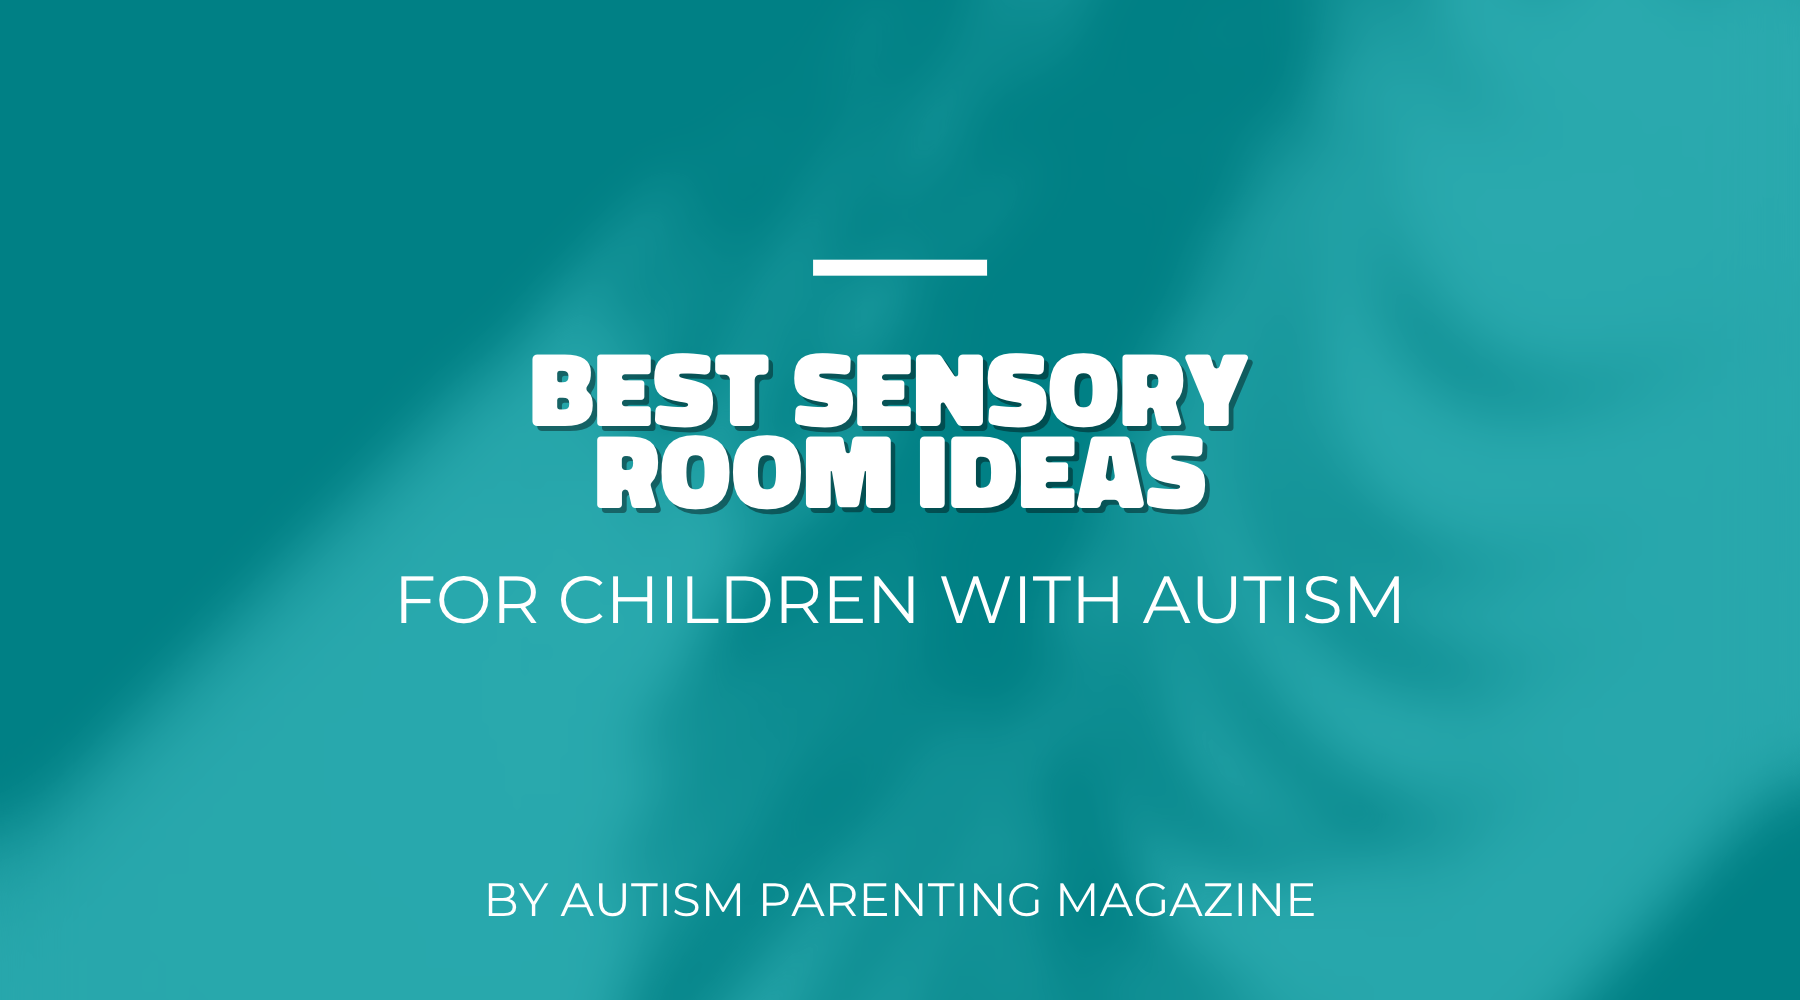 Sensory Room Ideas for Children With Autism